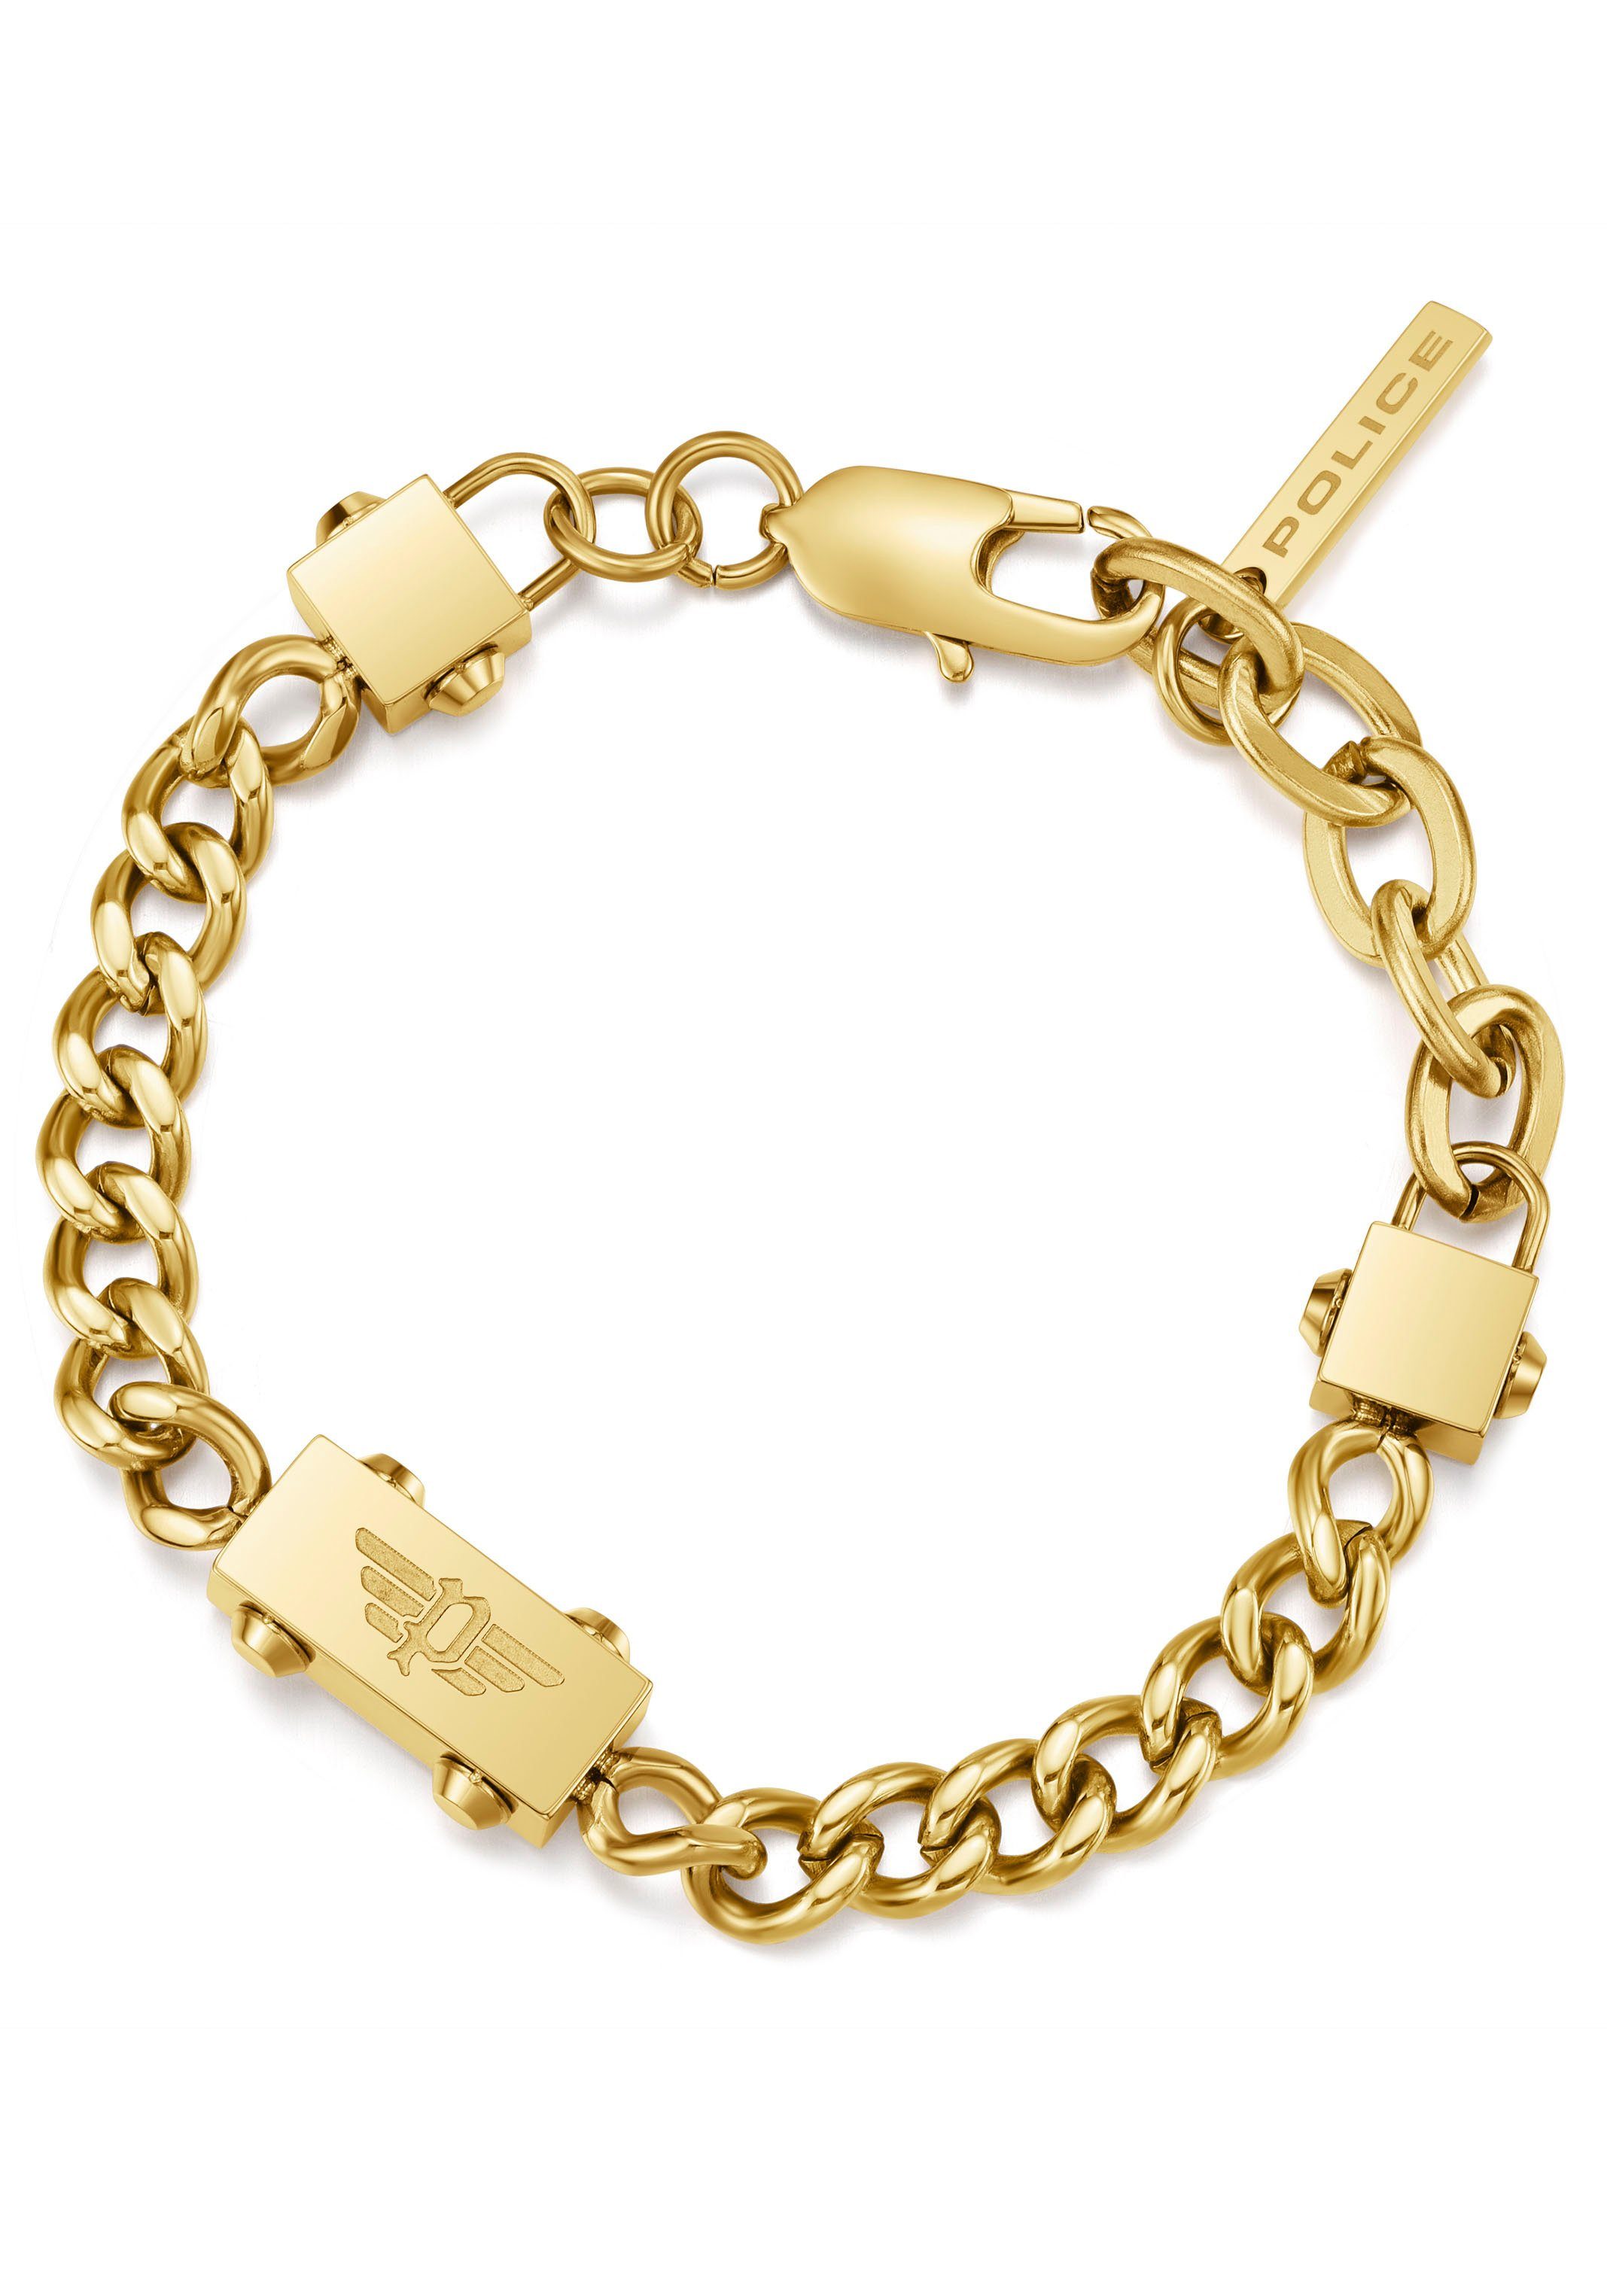 Police PEAGB0002102, Armband CHAINED, PEAGB0002106 gelbgoldfarben